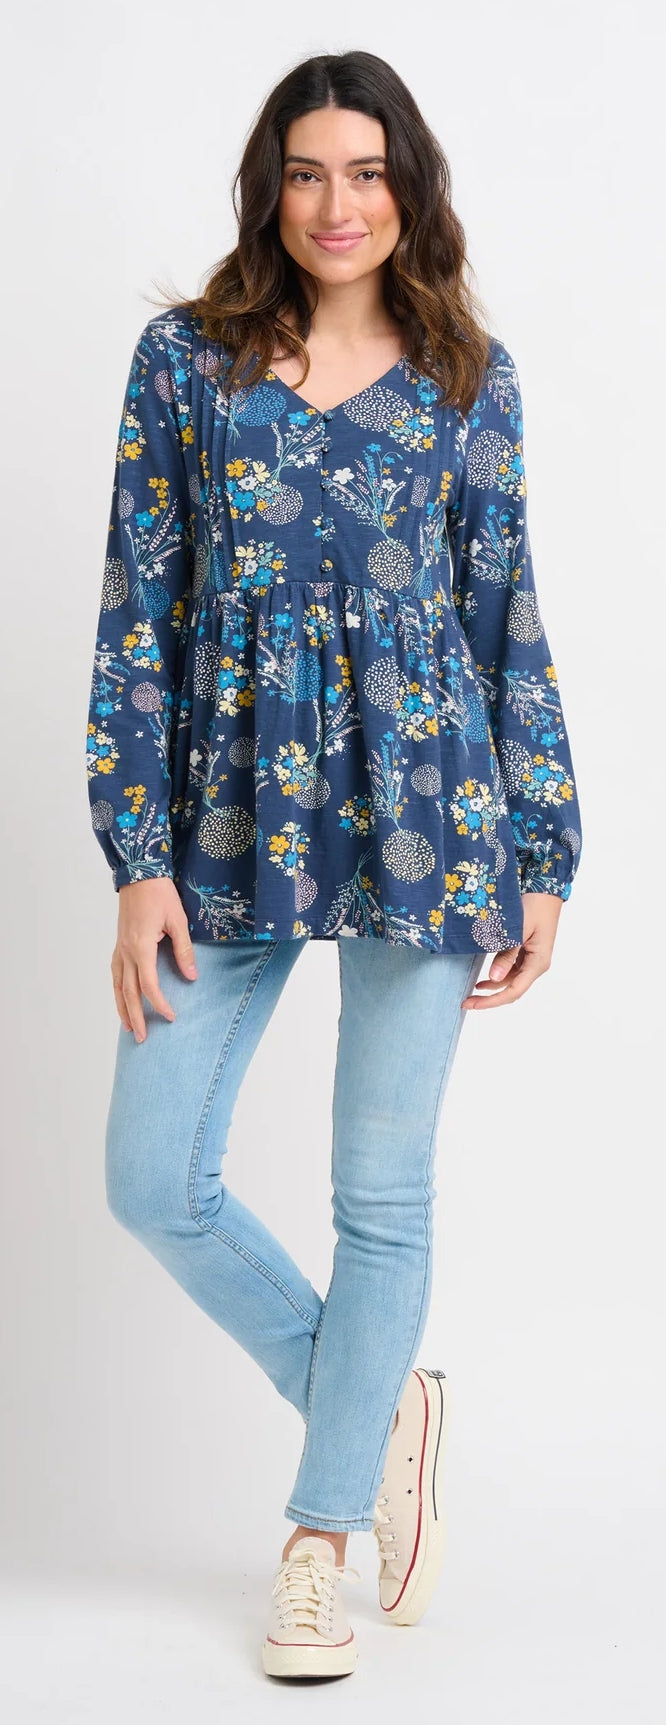 Tunic style floral print womens blouse from Brakeburn